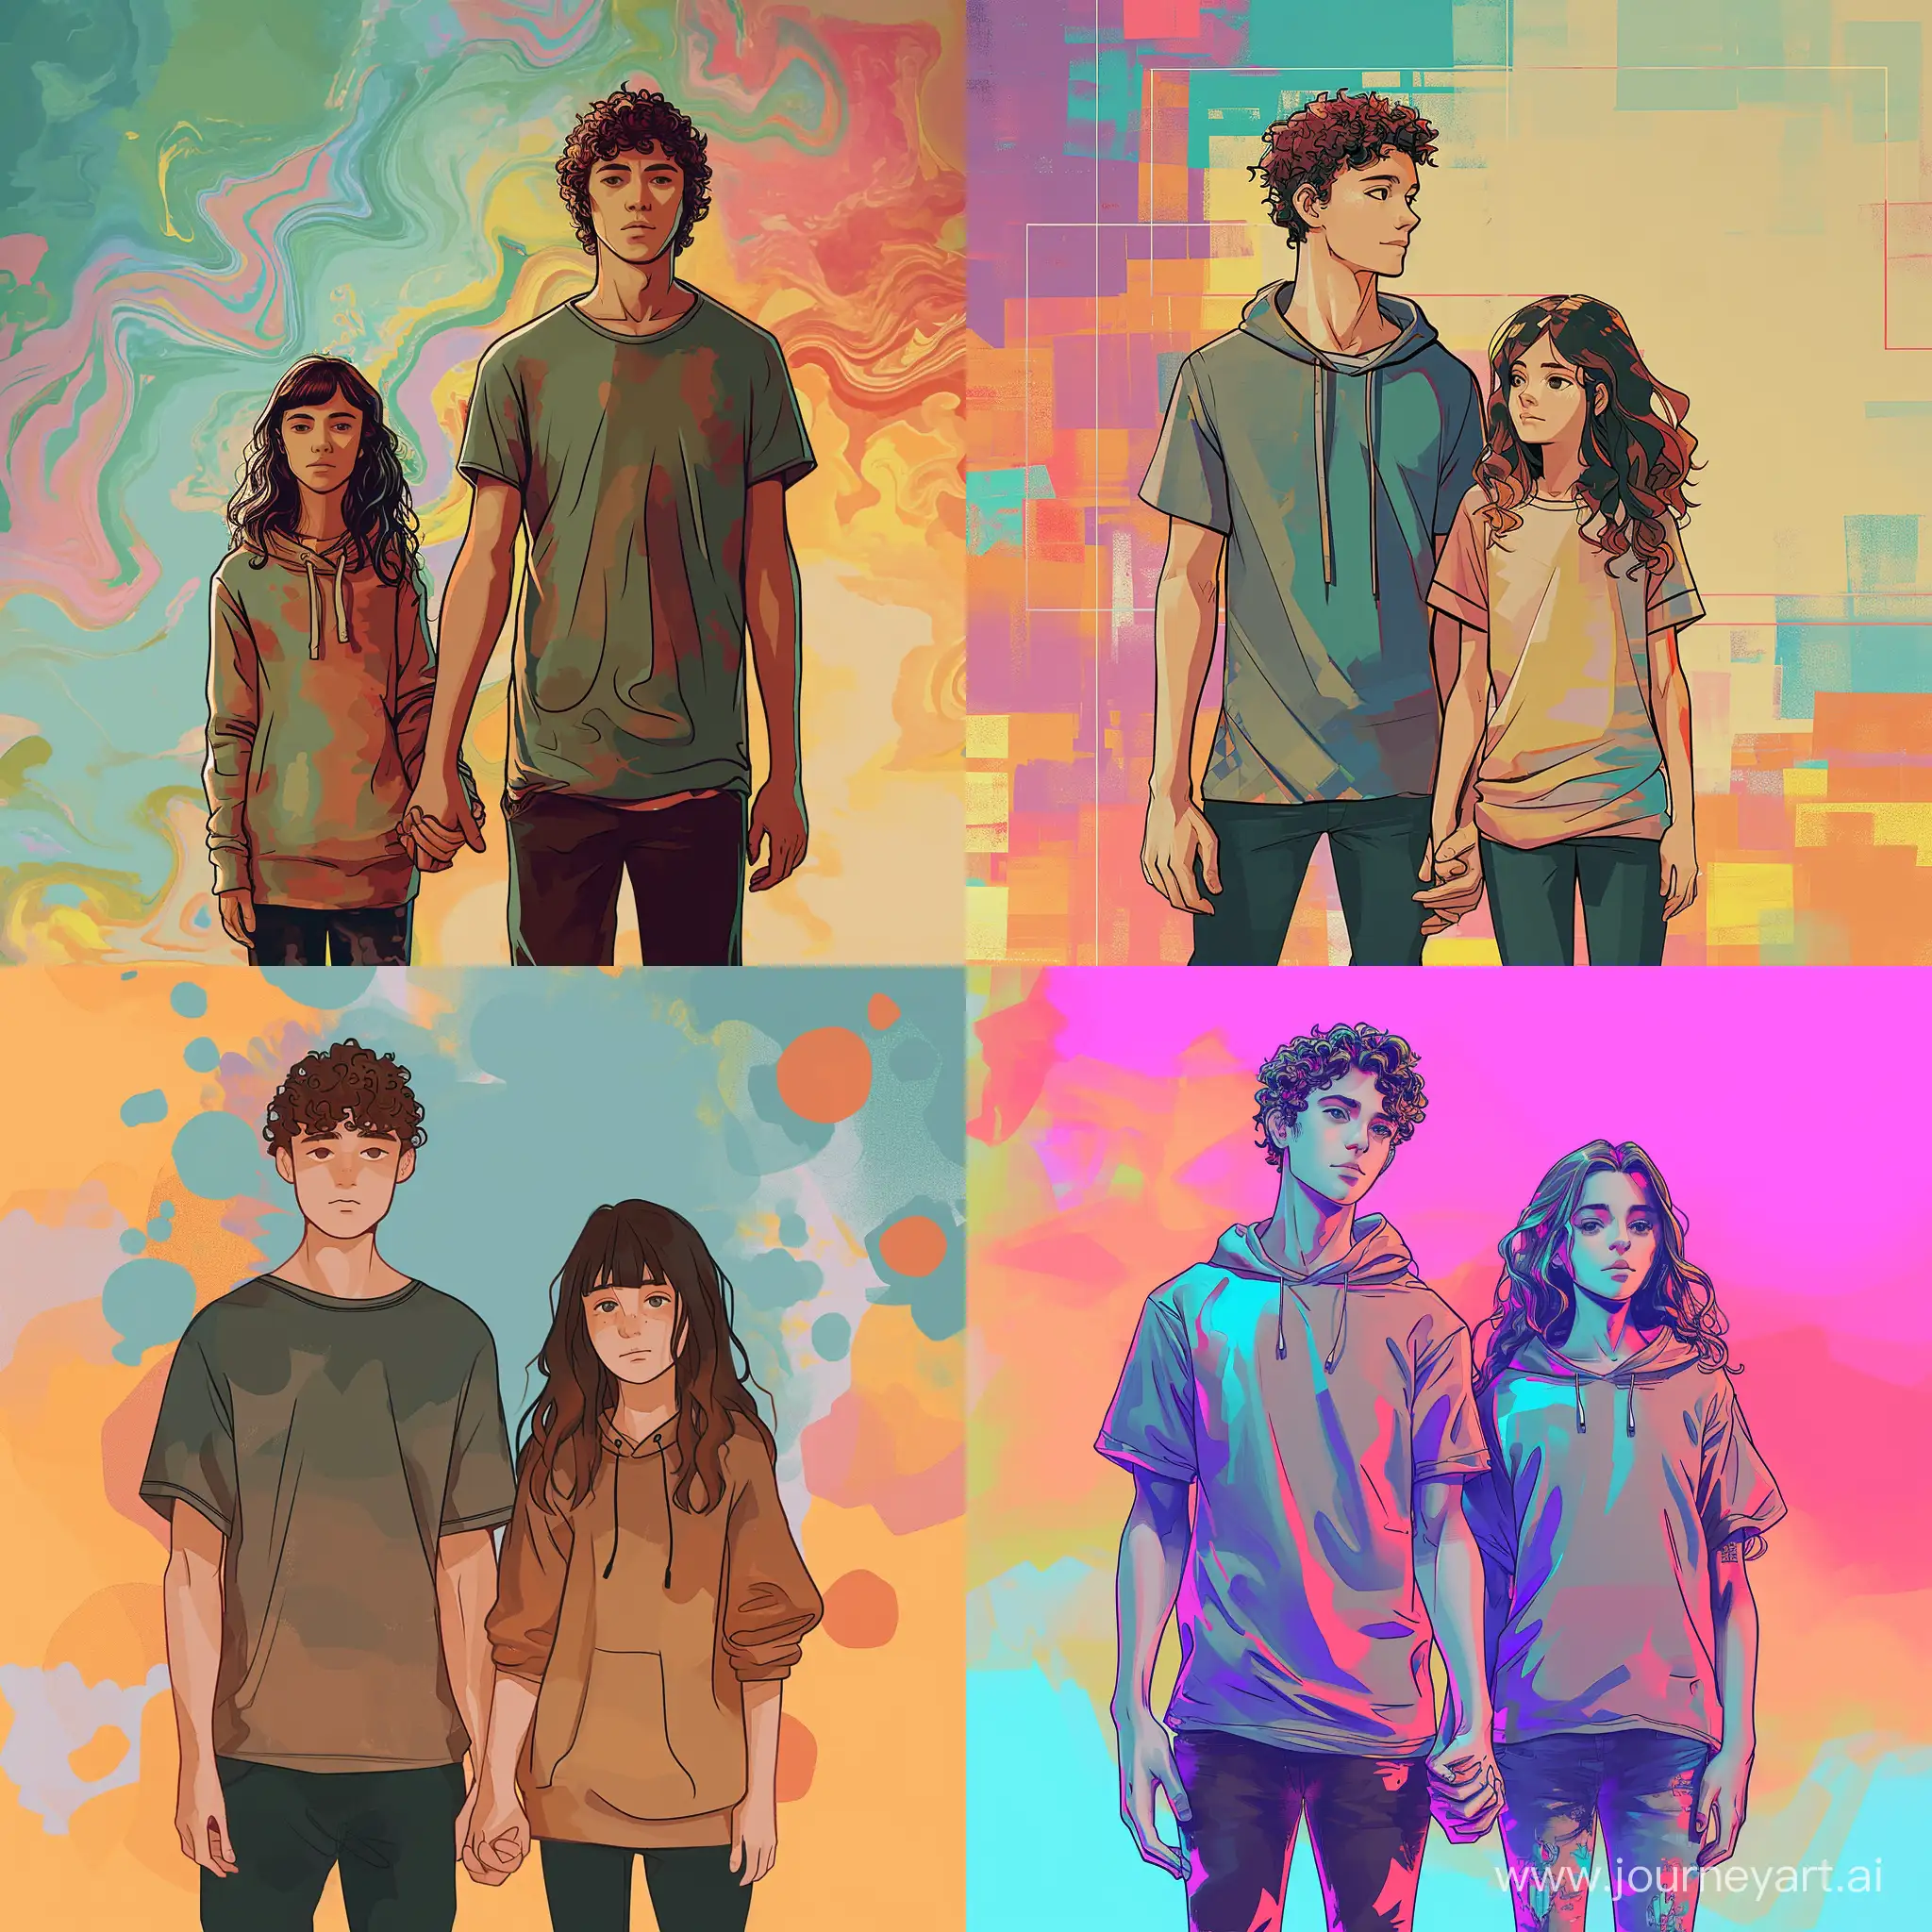 Tall-Guy-in-TShirt-and-Short-Girl-in-Hoodies-Holding-Hands-Abstract-Colored-Background